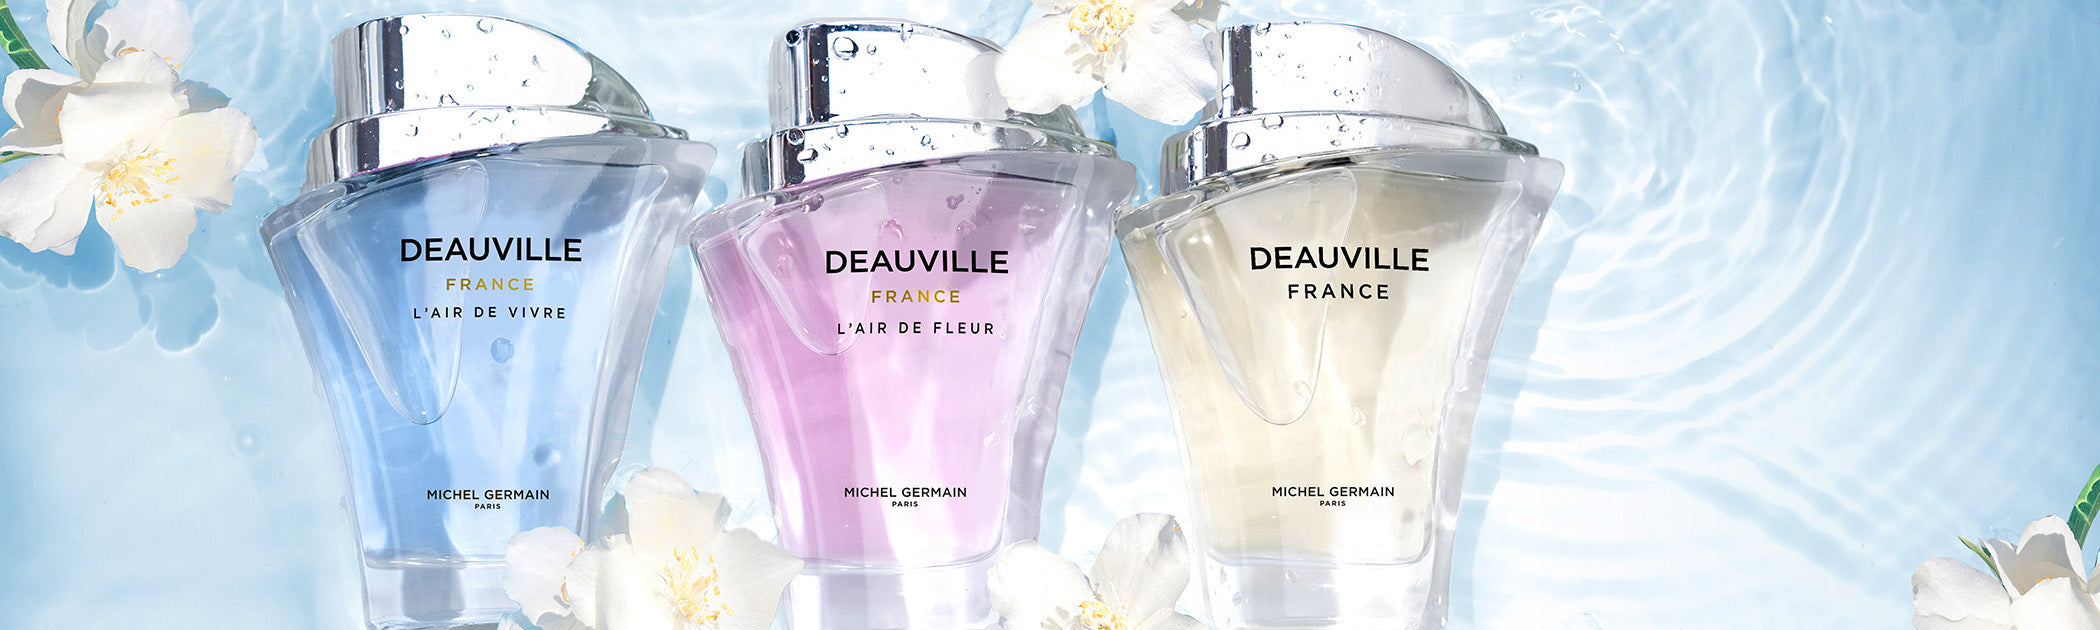 Deauville-Perfume-Collection-Banner